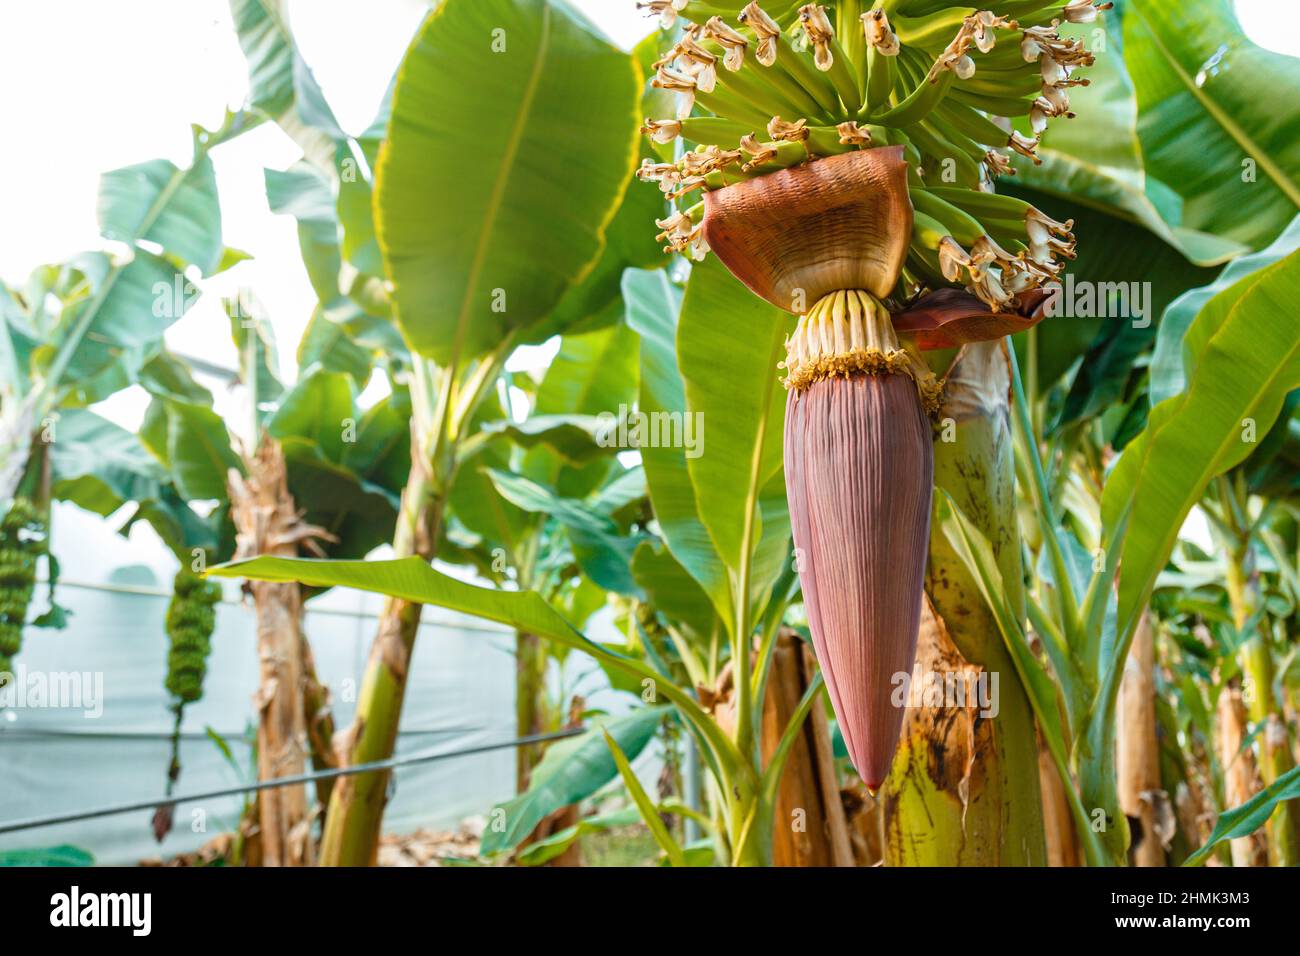 Big Banana flower on green branch. Young Banana blossom with leaves close up on palm tree in tropical garden. Banana fruit production at banana Stock Photo